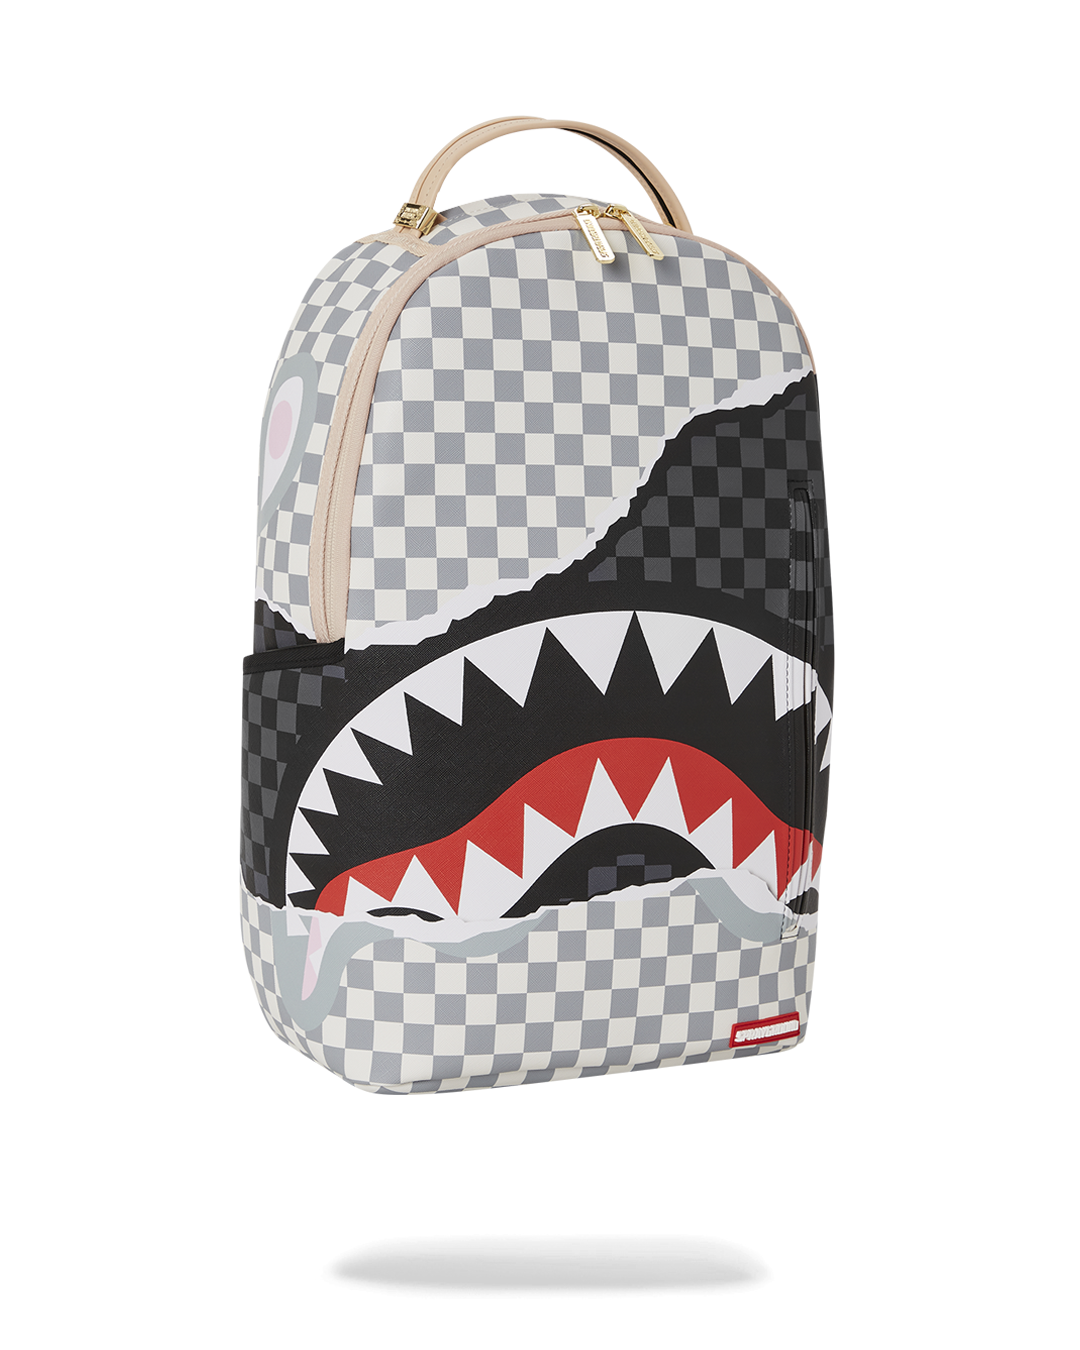 Sharks In Paris Backpack, Gray